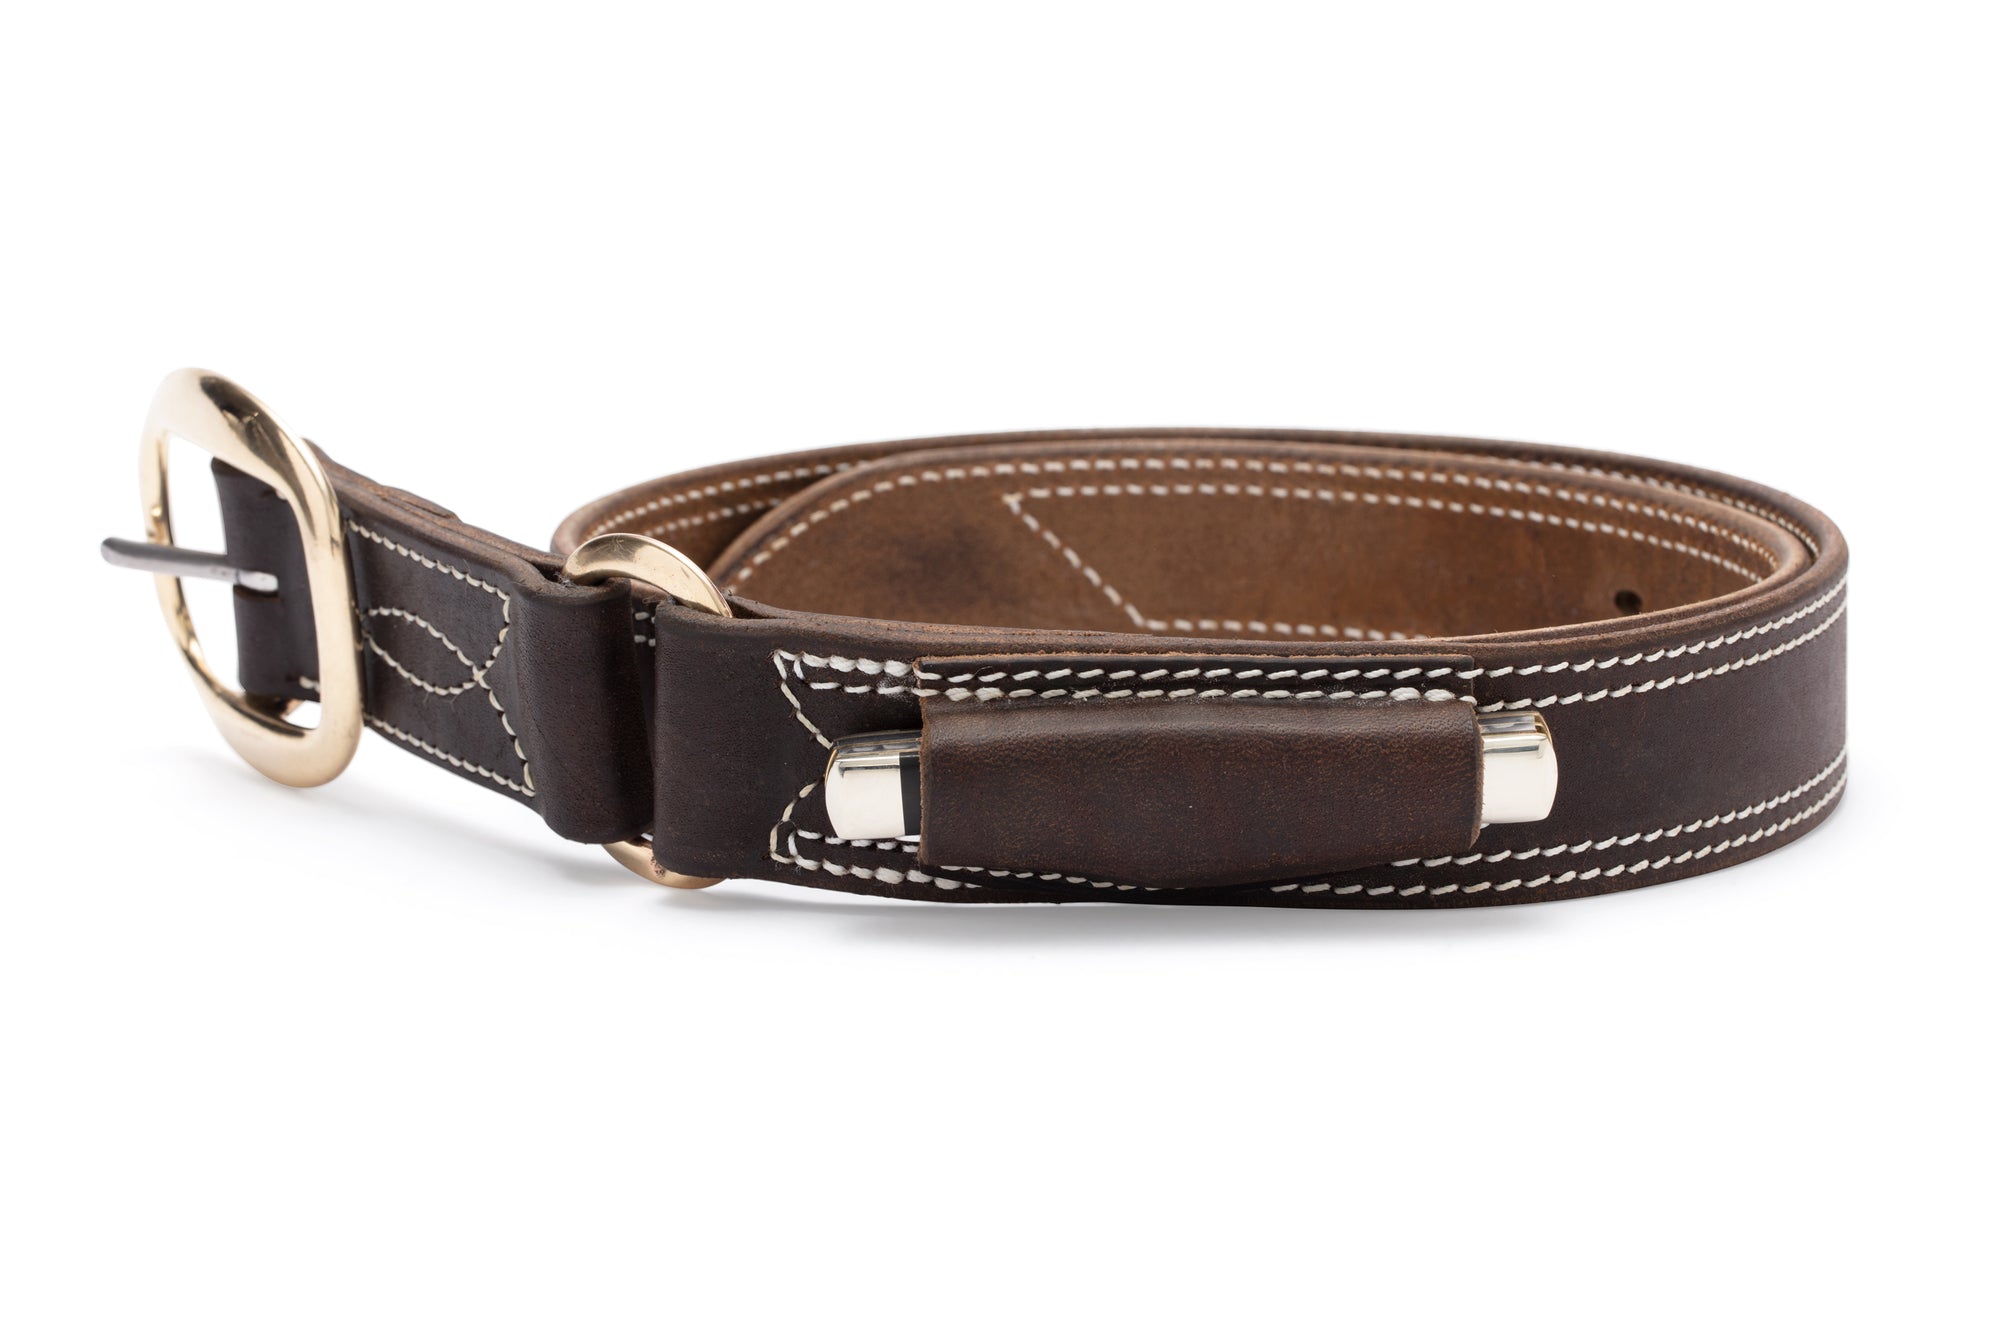 Ringers Leather Belt with Pocket Knife Pouch - Angus Barrett Saddlery